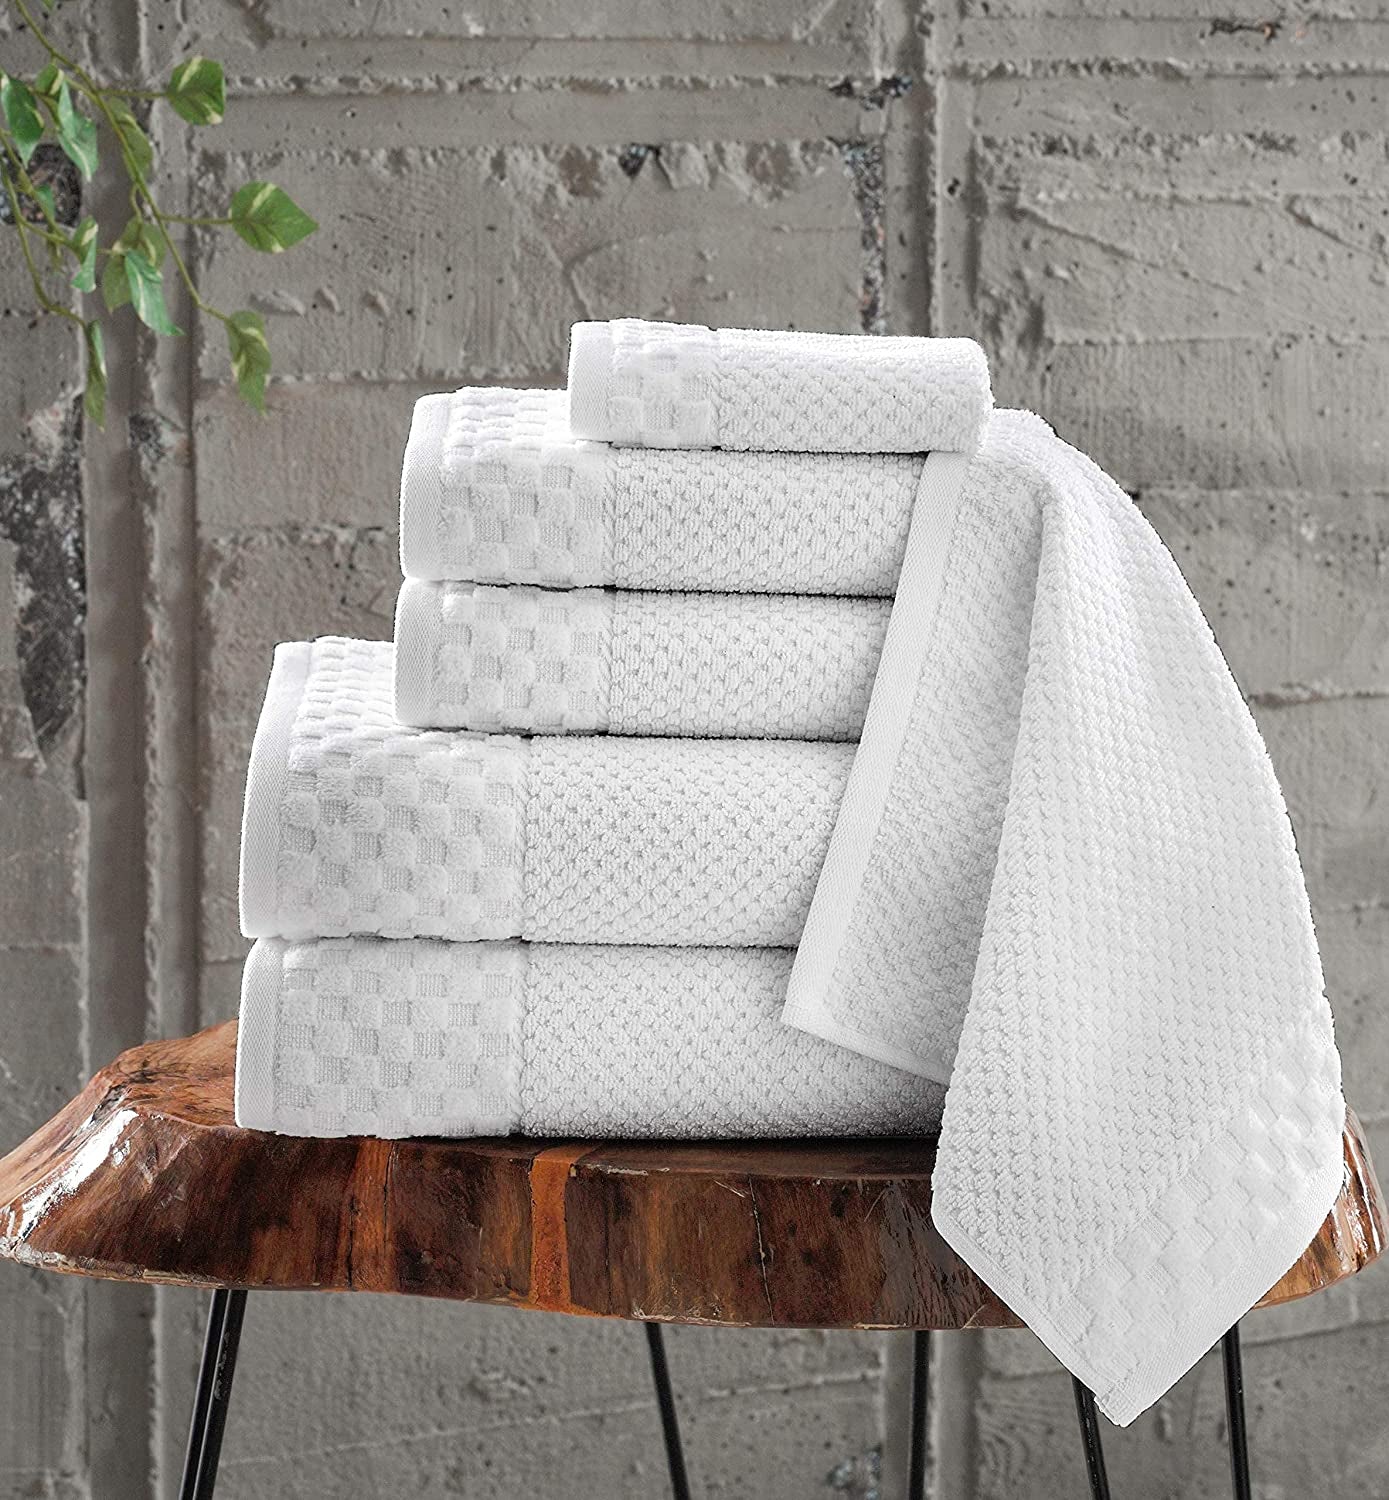 CTT Set of 6-100% Turkish Cotton, Absorbent & Comfy, Includes 2 Bath Towel 2 Hand Towel & 2 Washcloth | (White)